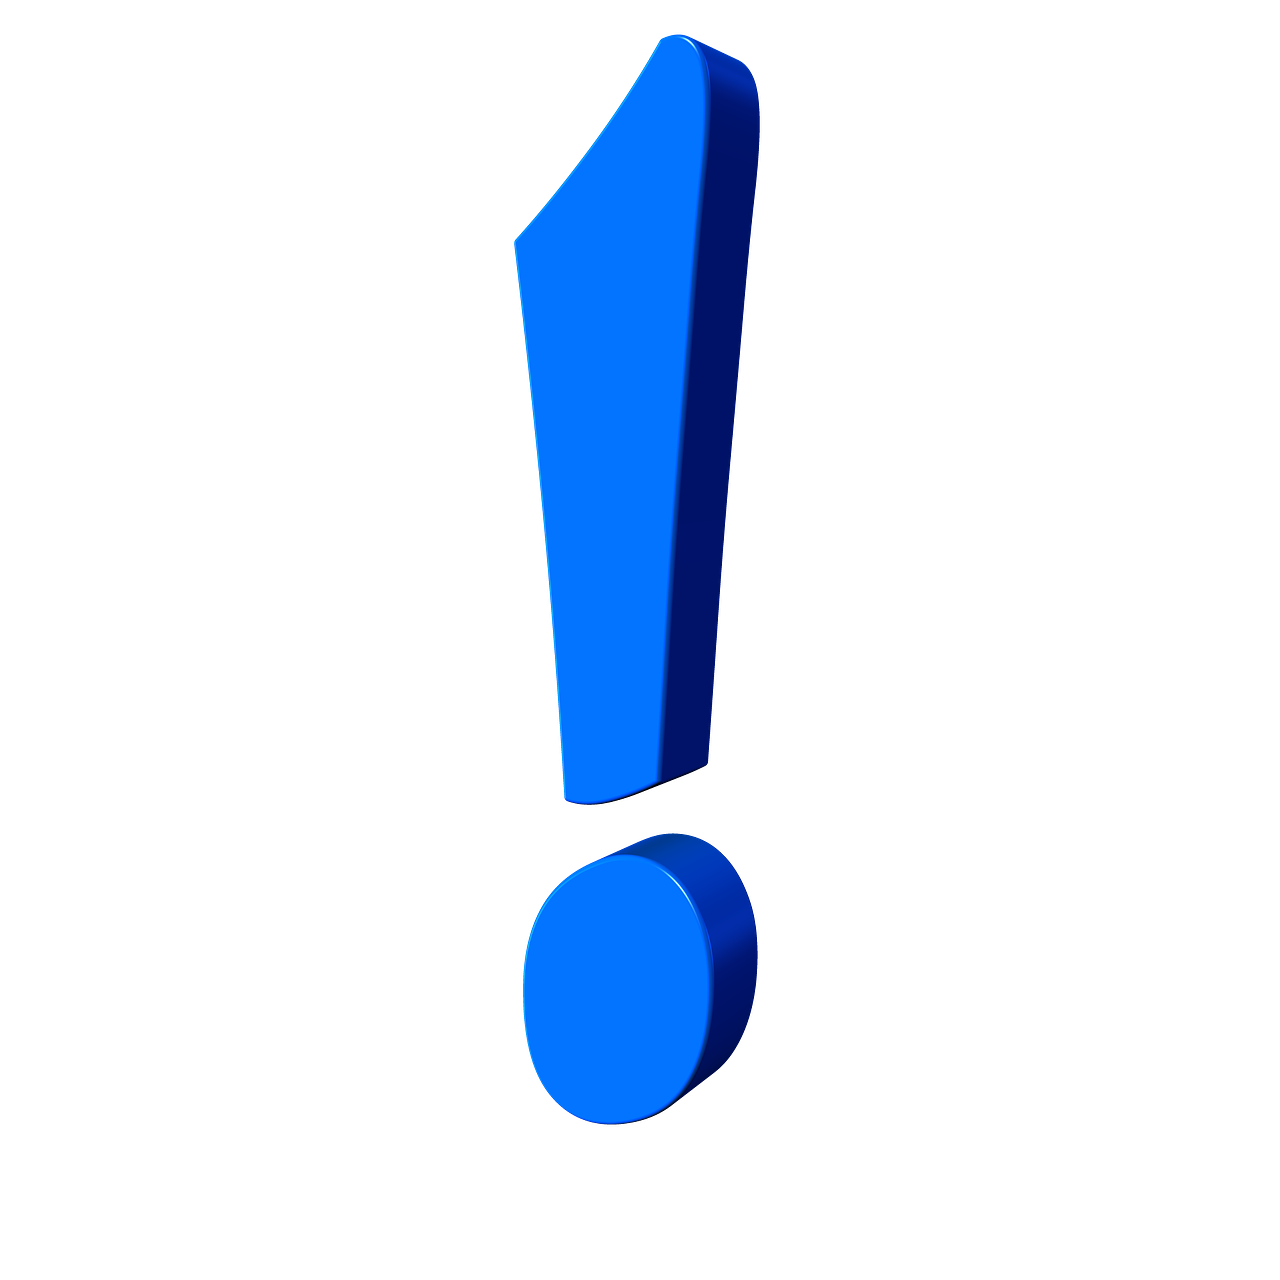 exclamation-point-507768_1280 (c) geralt In: Pixabay.com